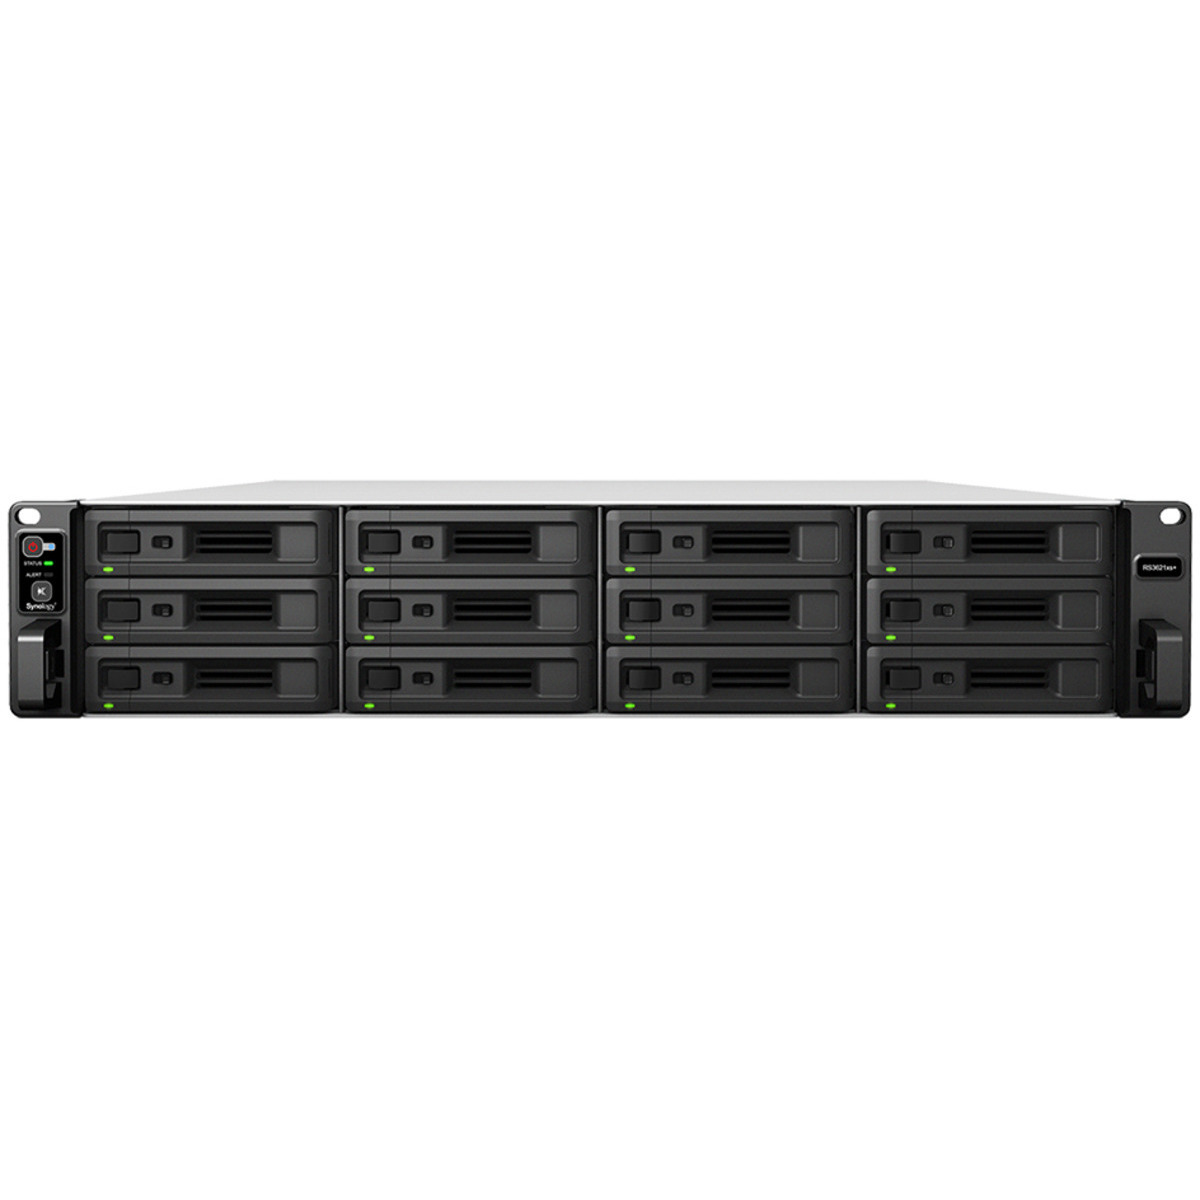 Synology RackStation RS3621xs+ 14tb 12-Bay RackMount Large Business / Enterprise NAS - Network Attached Storage Device 7x2tb Western Digital Gold WD2005FBYZ 3.5 7200rpm SATA 6Gb/s HDD ENTERPRISE Class Drives Installed - Burn-In Tested RackStation RS3621xs+